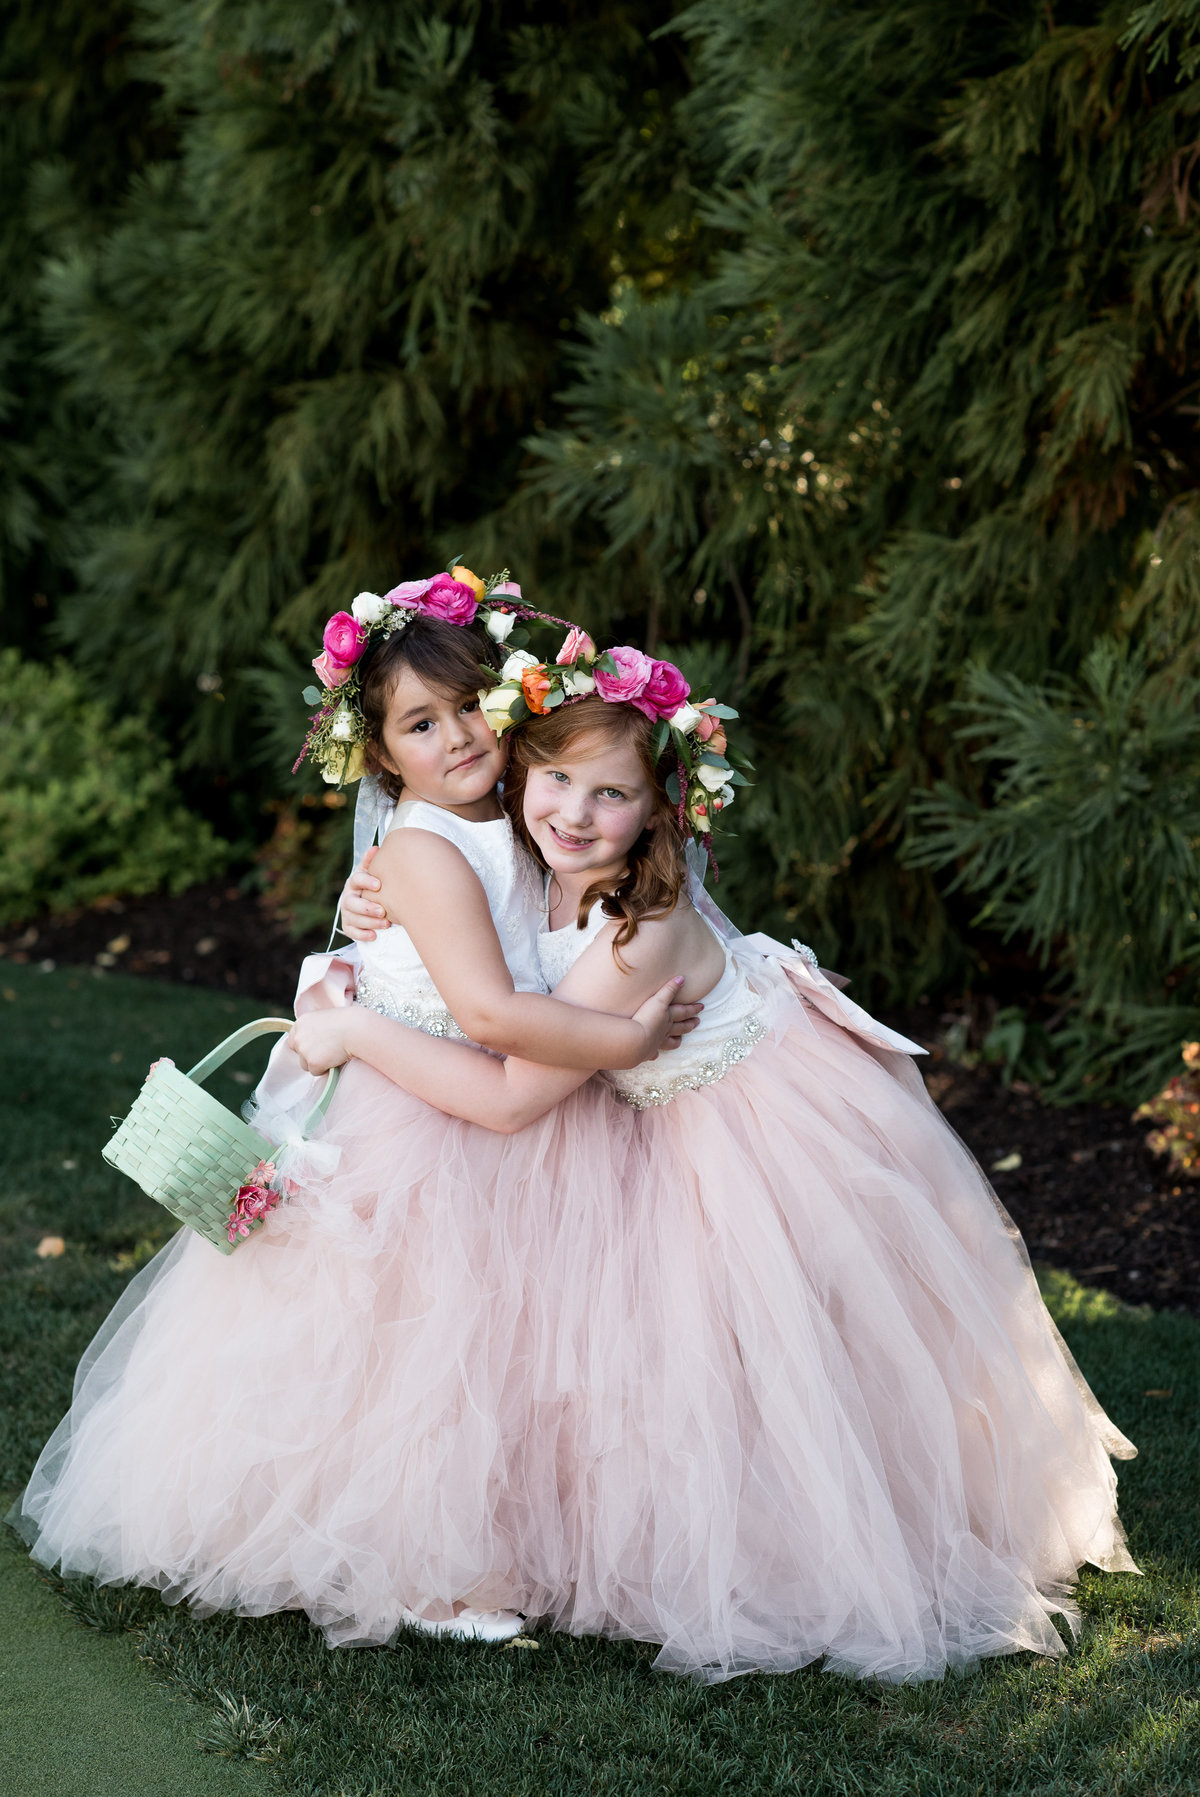 Flower girls with pink dresses and pink floral crowns